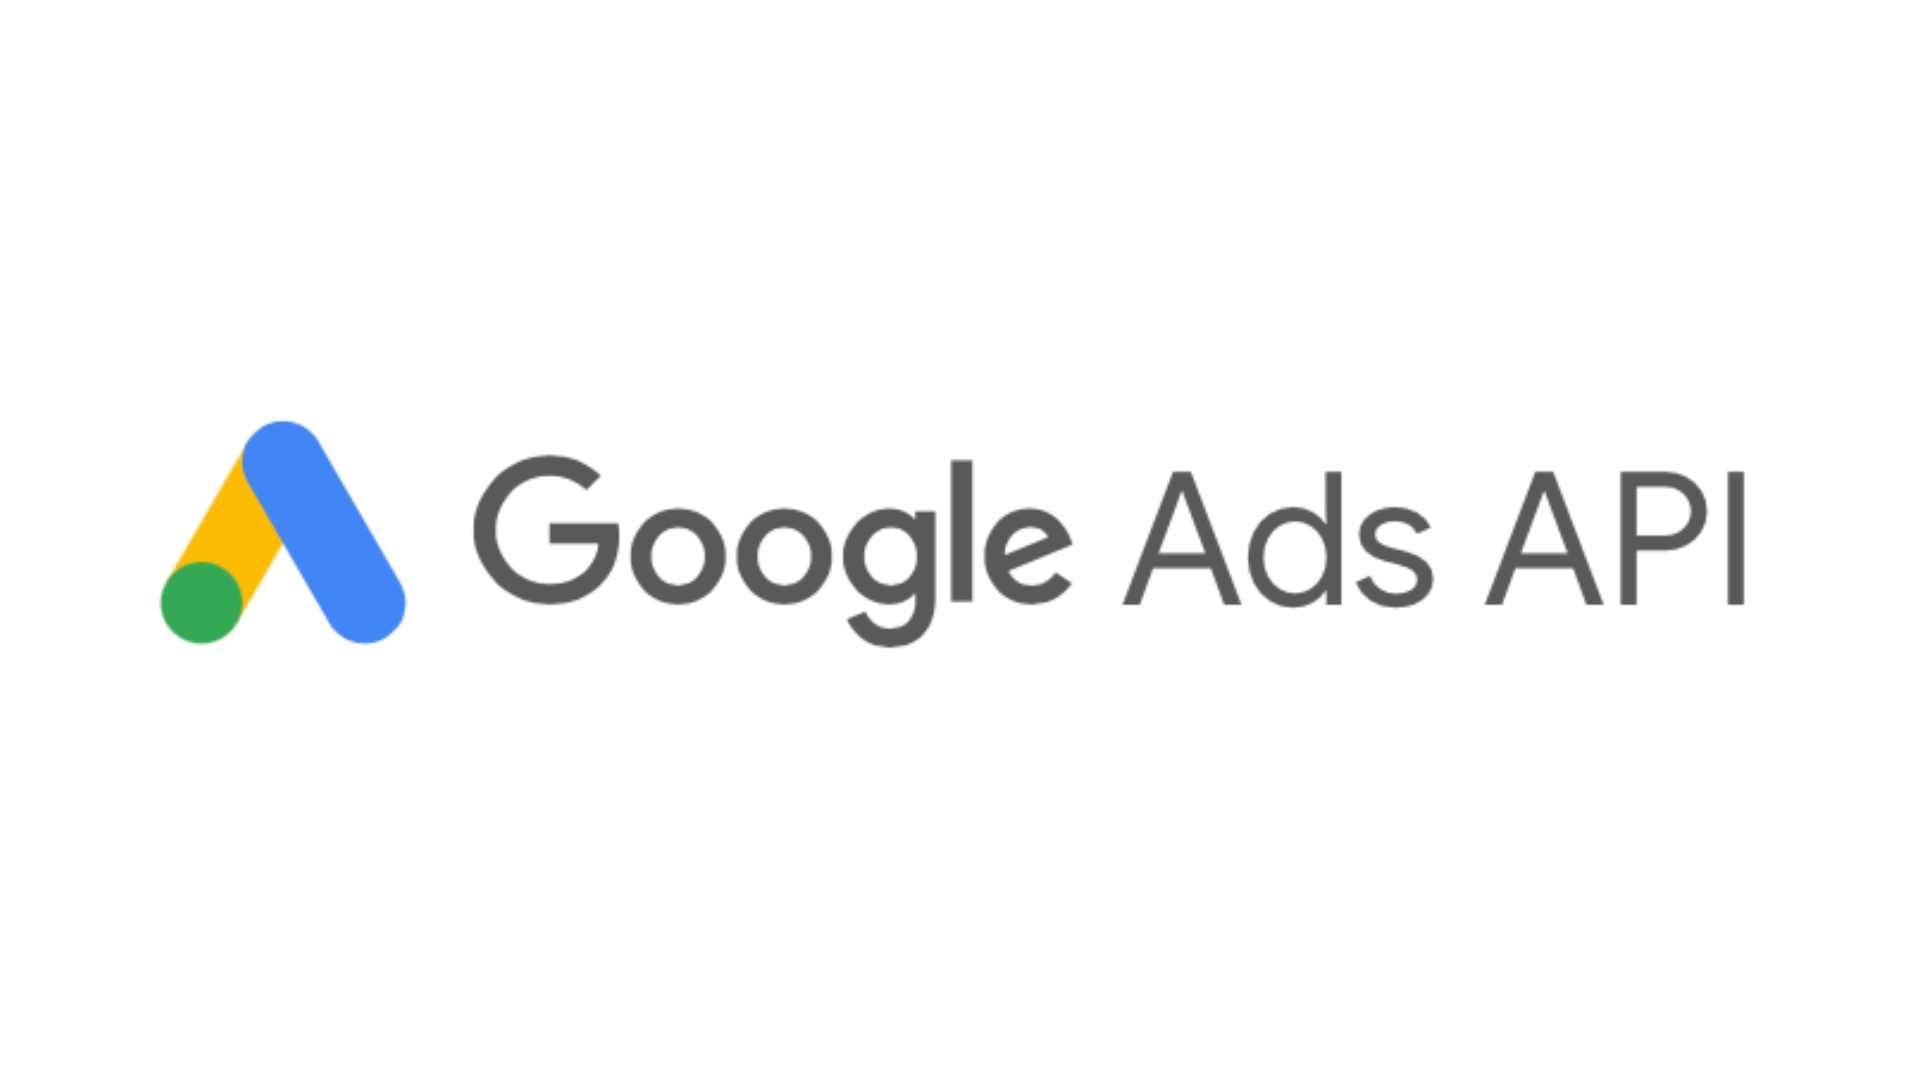 Google shares planning cycle for Google Ads API